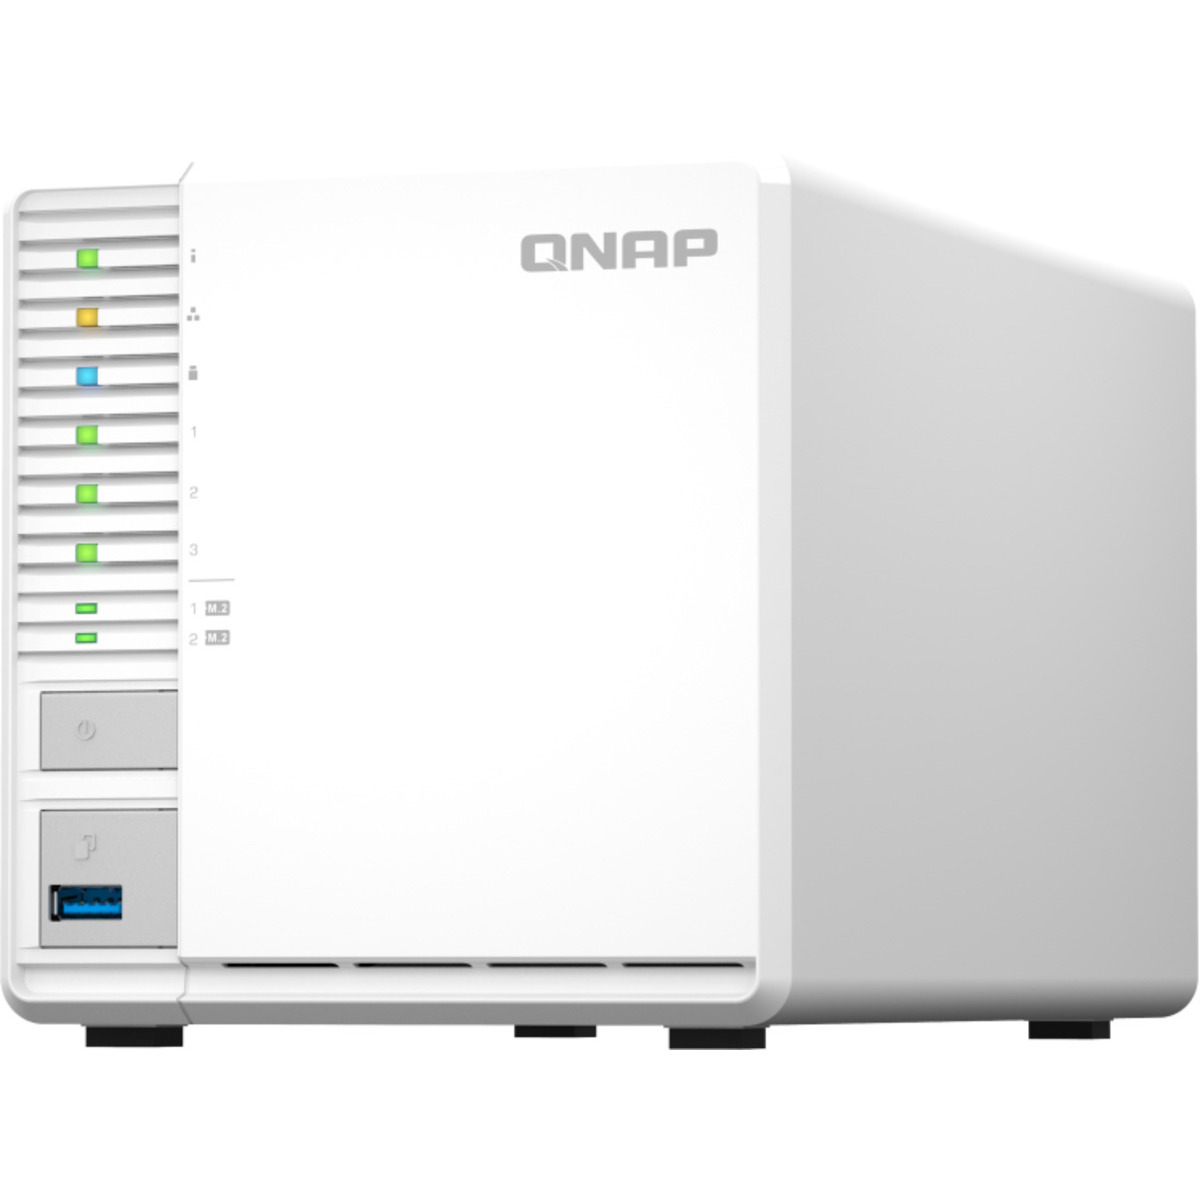 buy QNAP TS-364 66tb Desktop NAS - Network Attached Storage Device 3x22000gb Western Digital Red Pro WD221KFGX 3.5 7200rpm SATA 6Gb/s HDD NAS Class Drives Installed - Burn-In Tested - nas headquarters buy network attached storage server device das new raid-5 free shipping simply usa TS-364